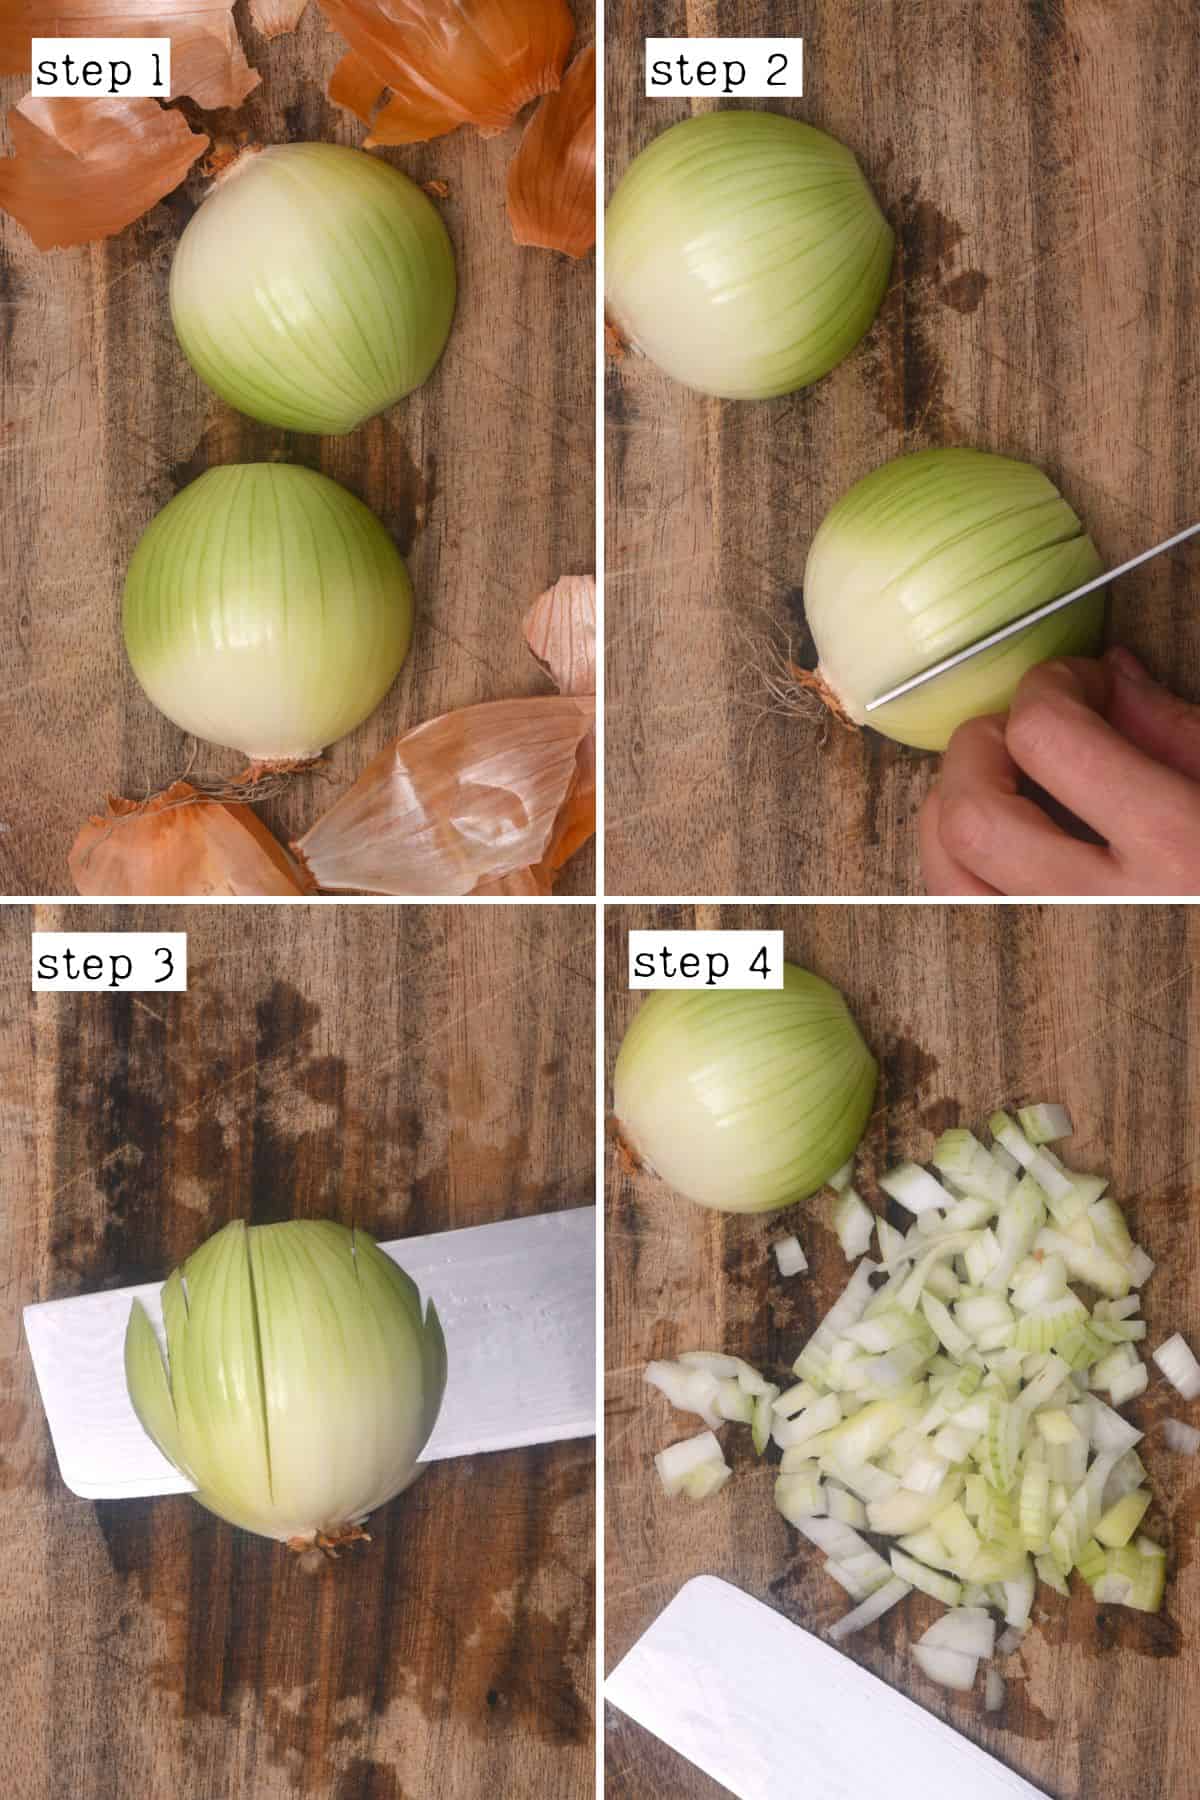 Steps for dicing an onion